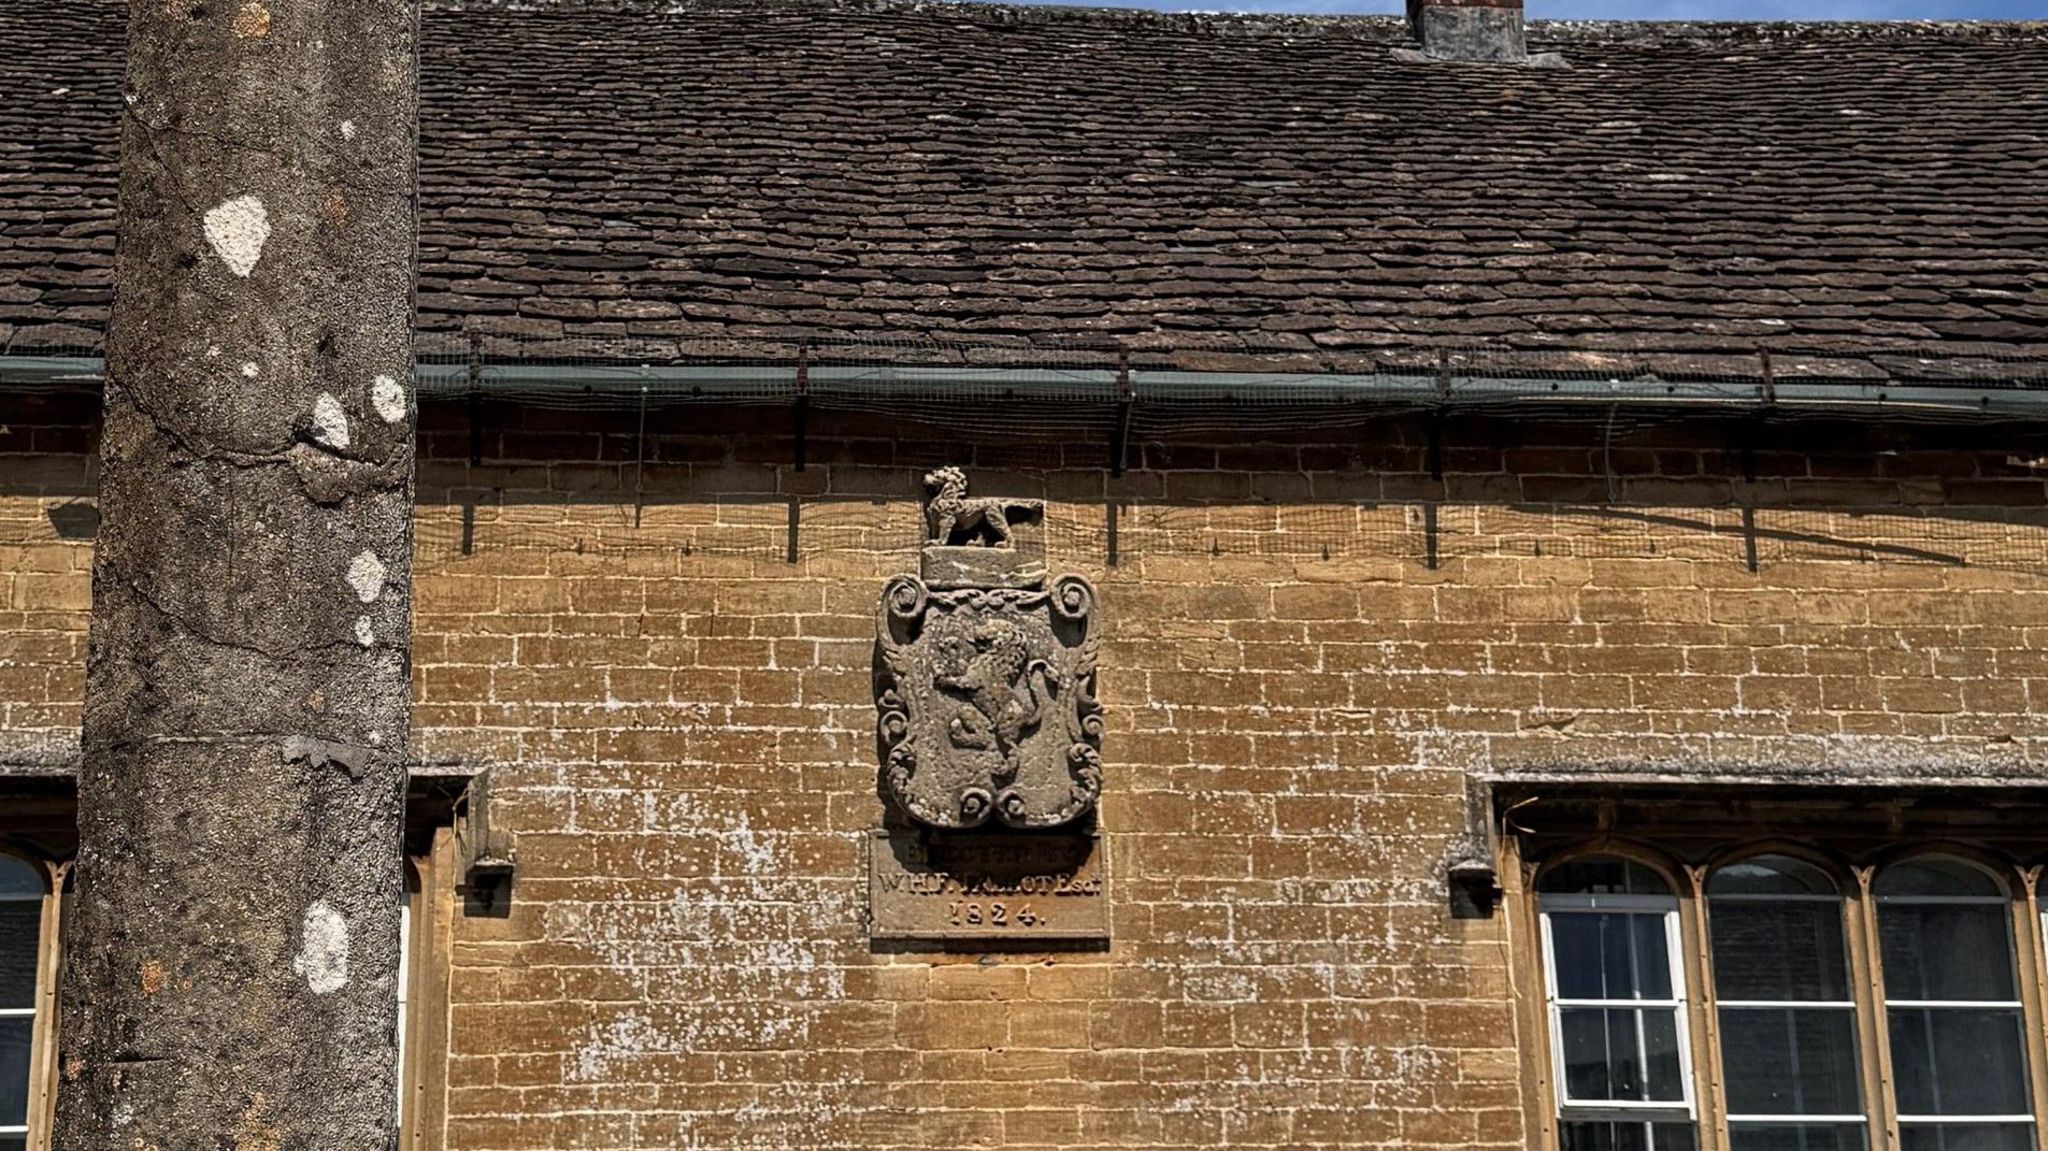 Lacock School in Wiltshire with an emblem of a lion with a plaque beneath it